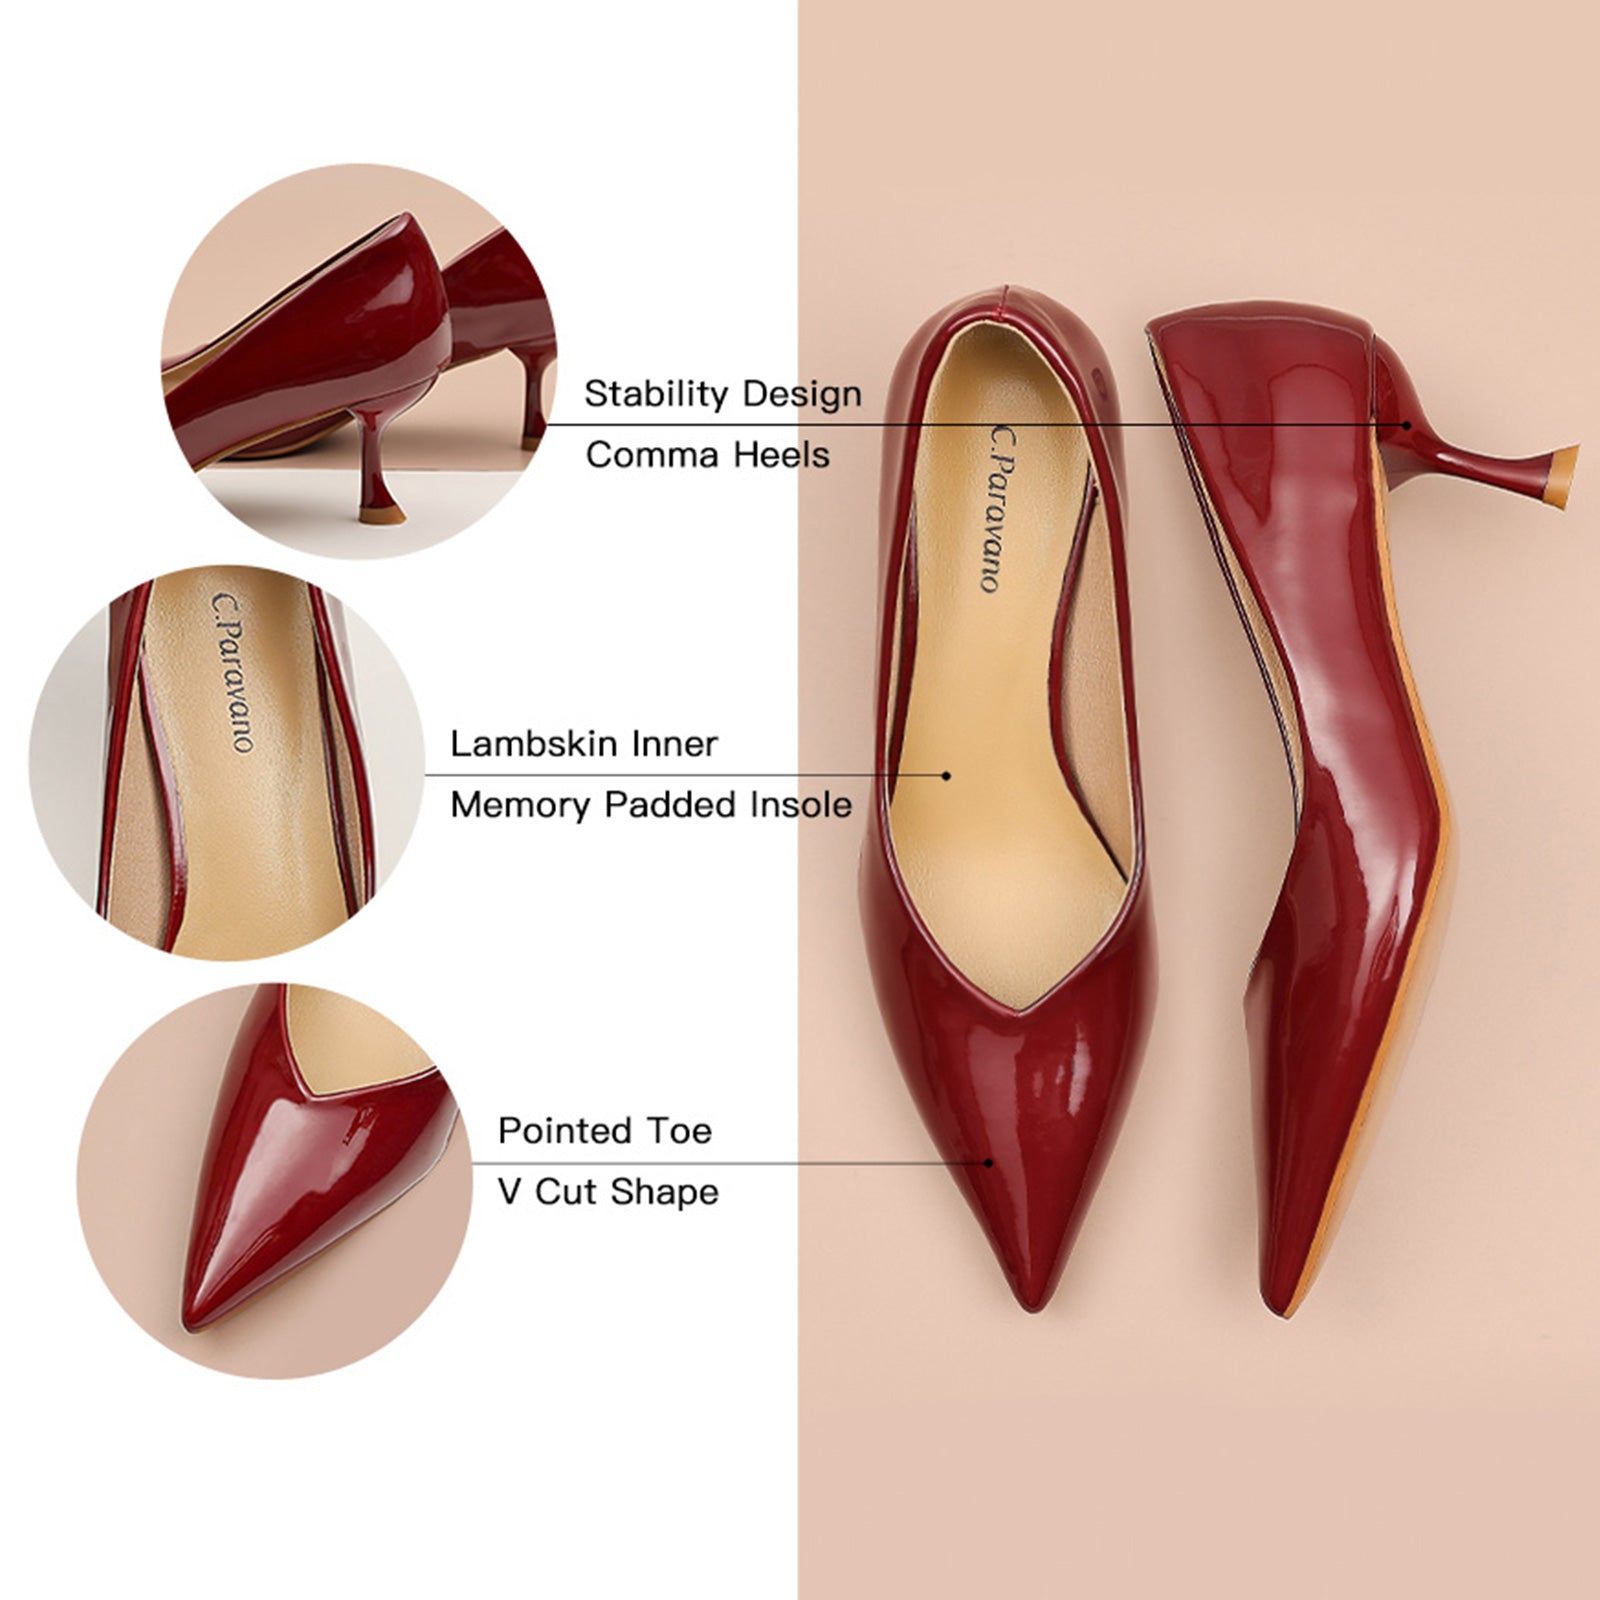 Glossed Red Patent Leather Pumps, combining timeless elegance with a modern twist in a bold color